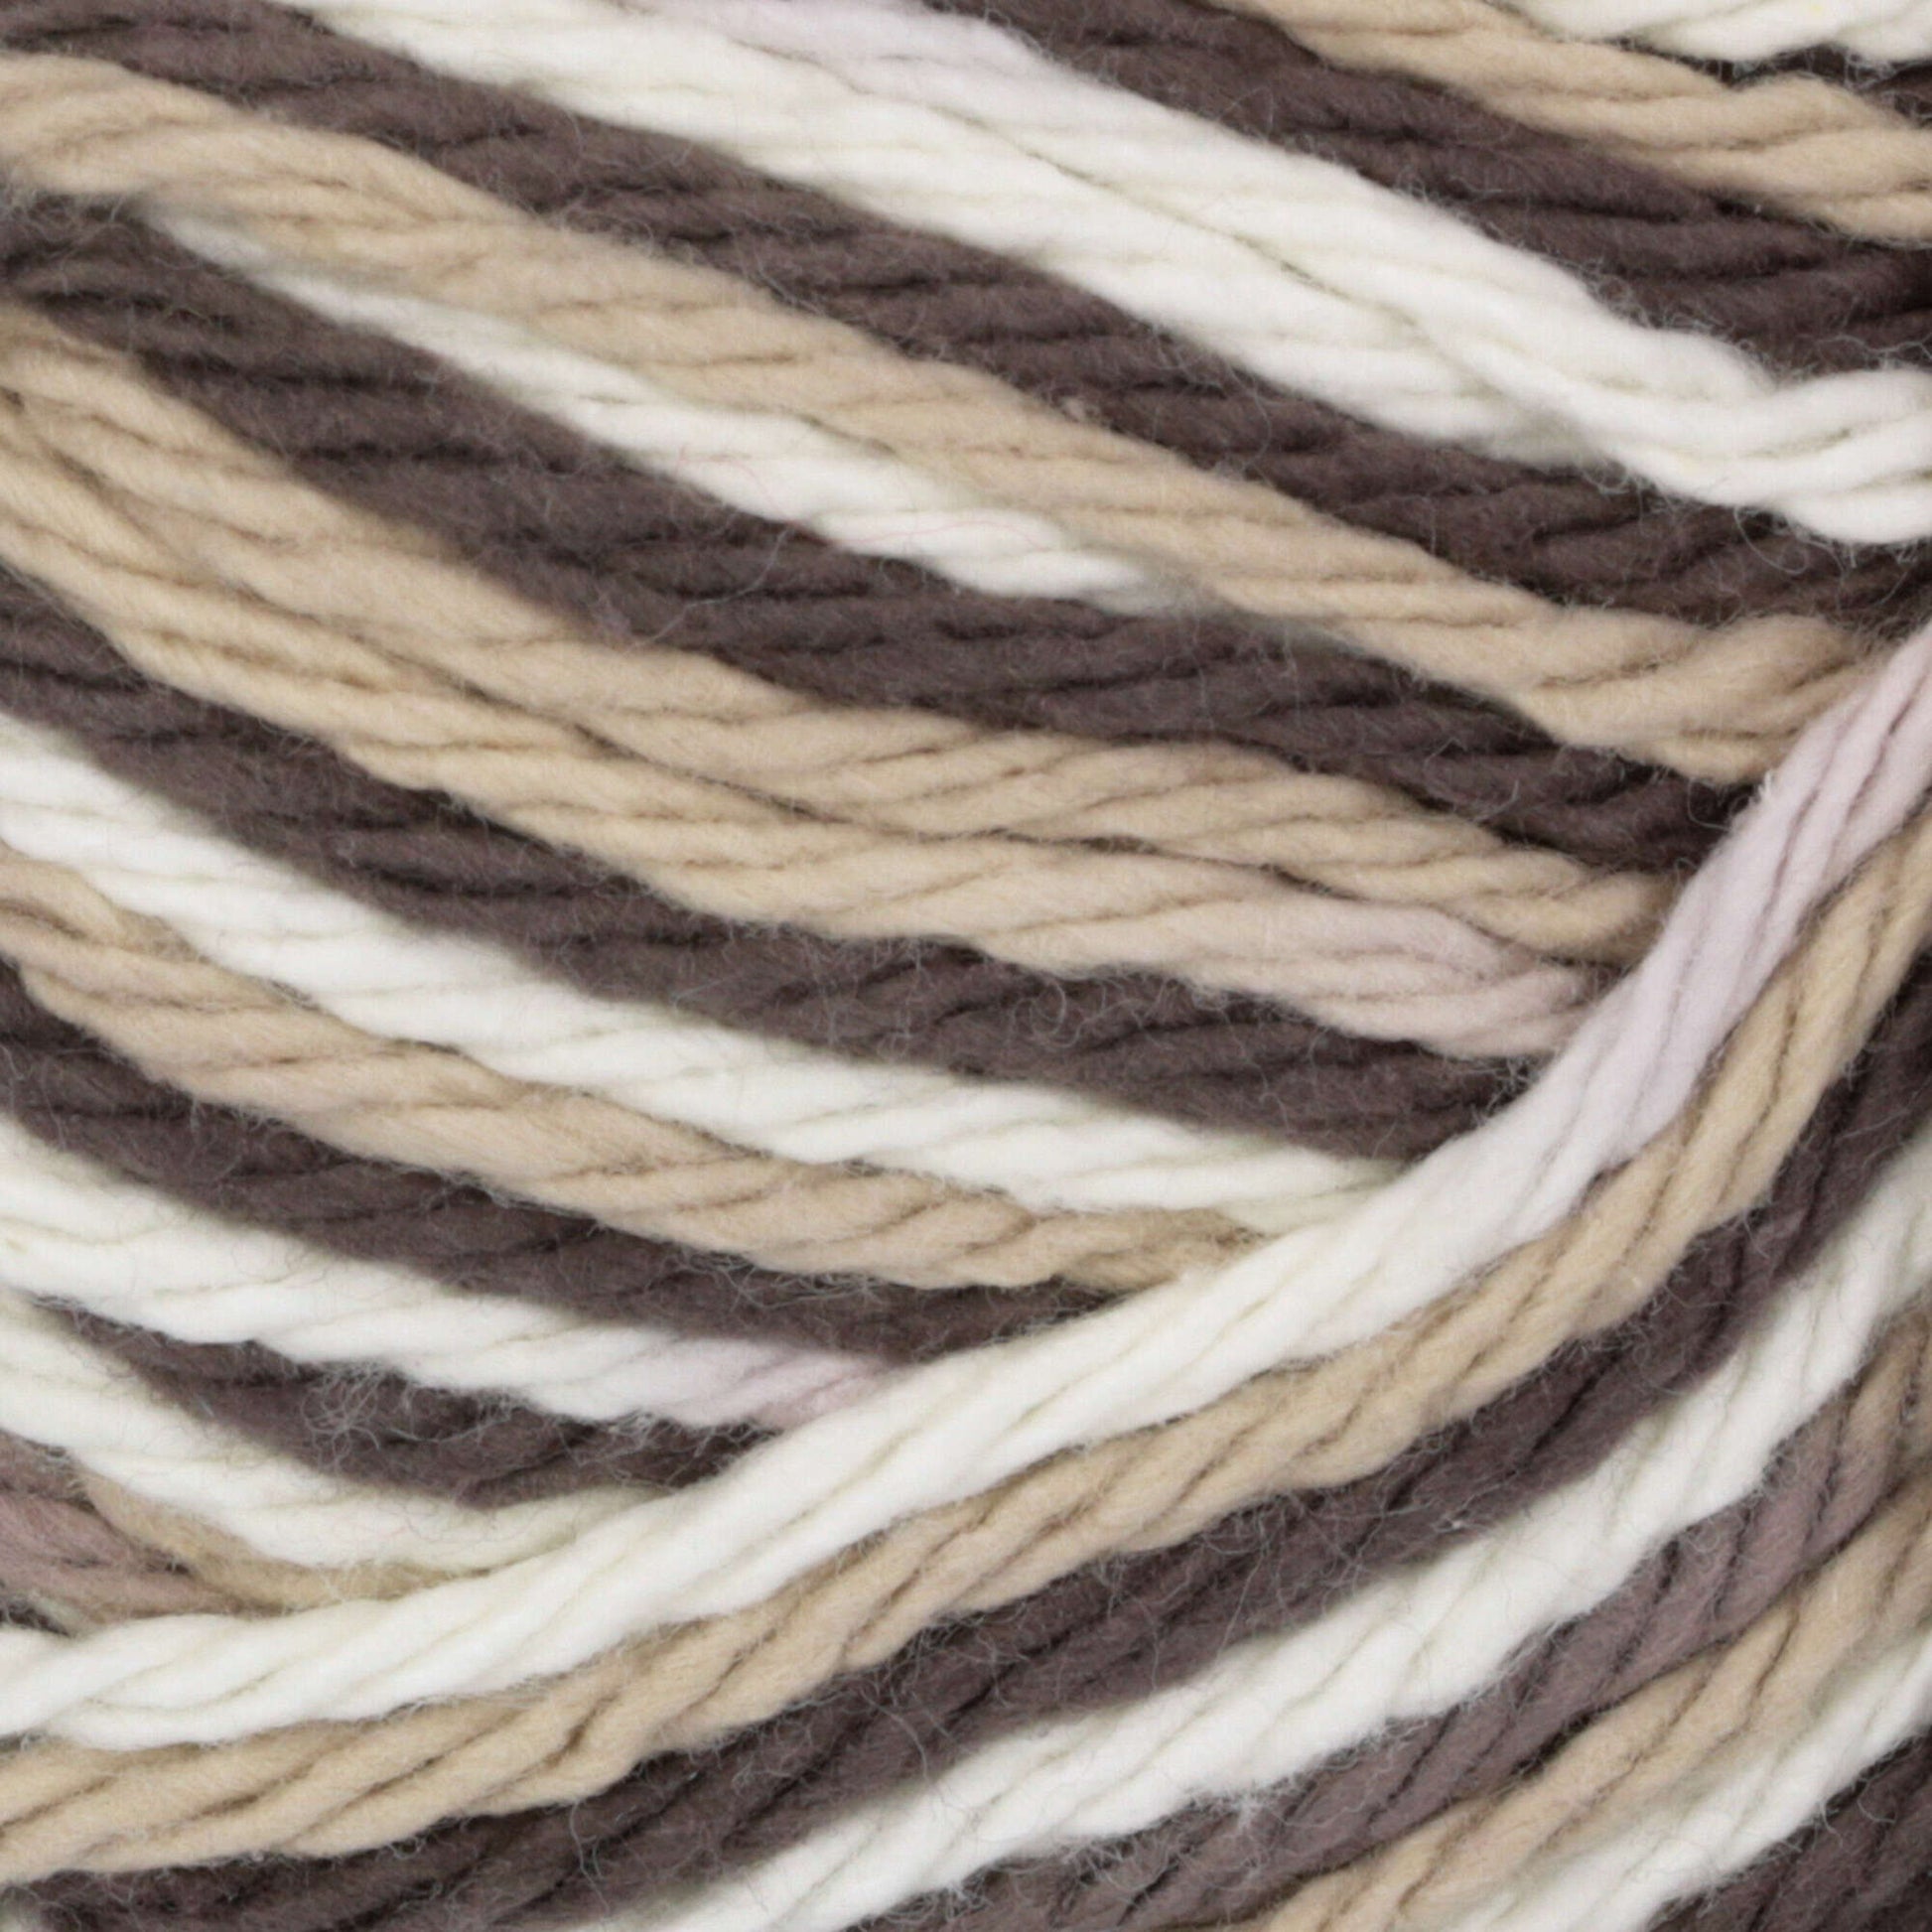 Bernat Handicrafter Cotton Ombres Yarn Chocolate Ombre